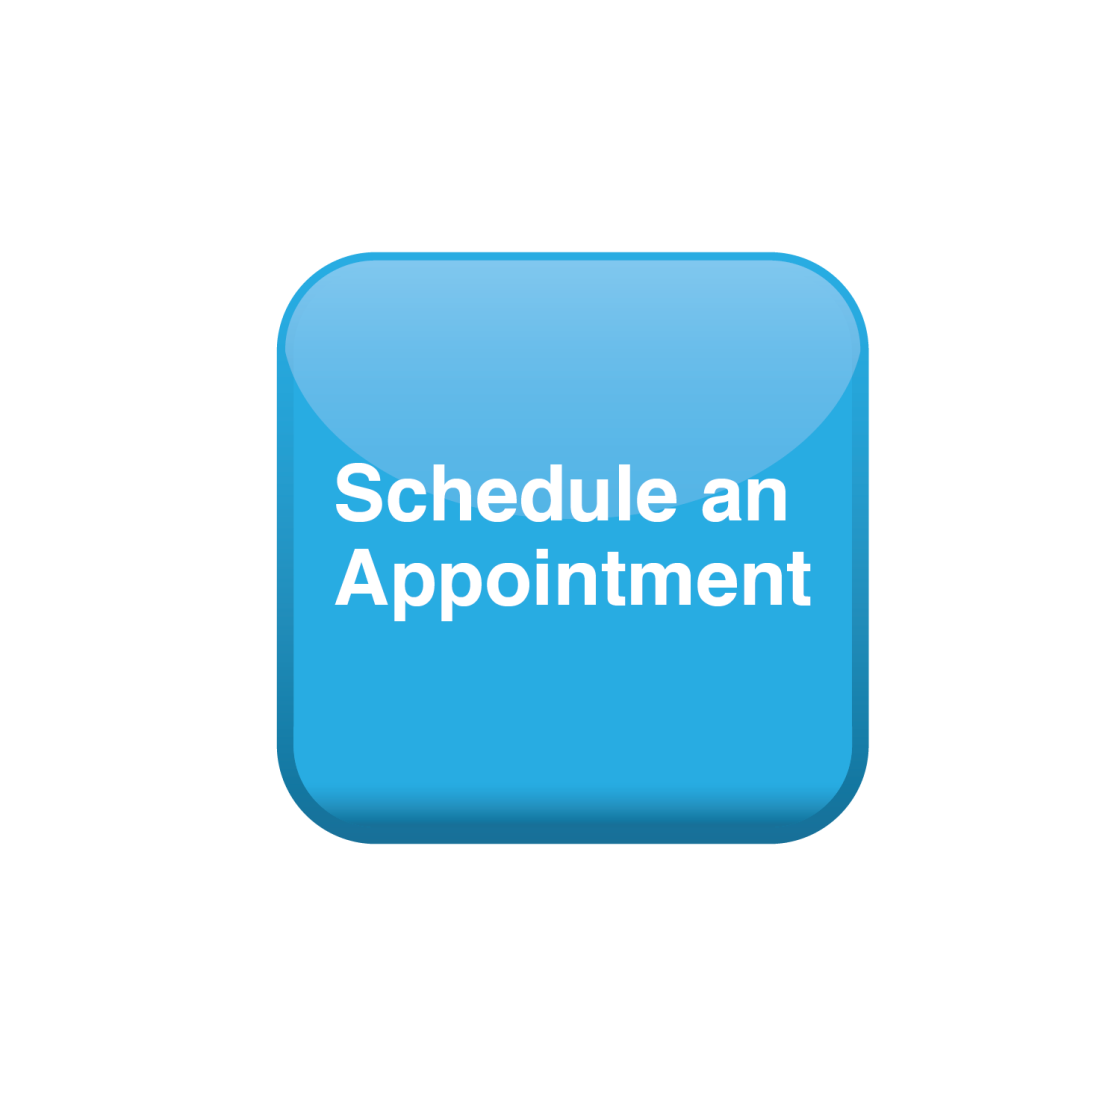 Schedule an Appointment Button